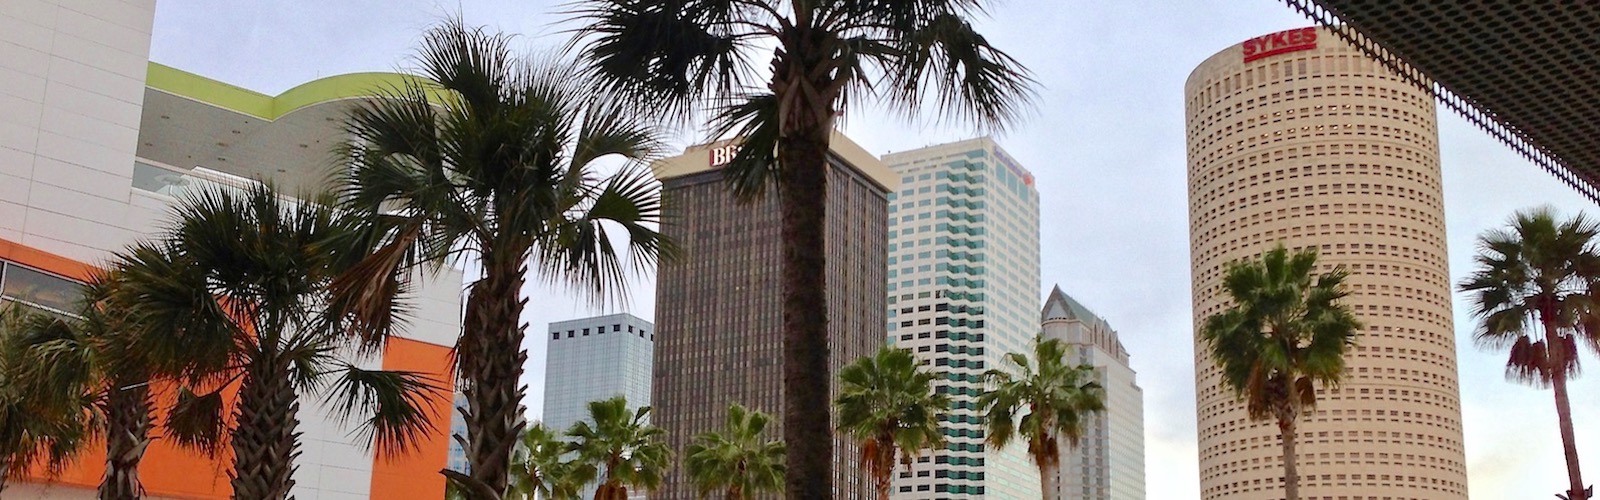 Downtown Tampa skyline as seen from The Tampa Riverwalk.